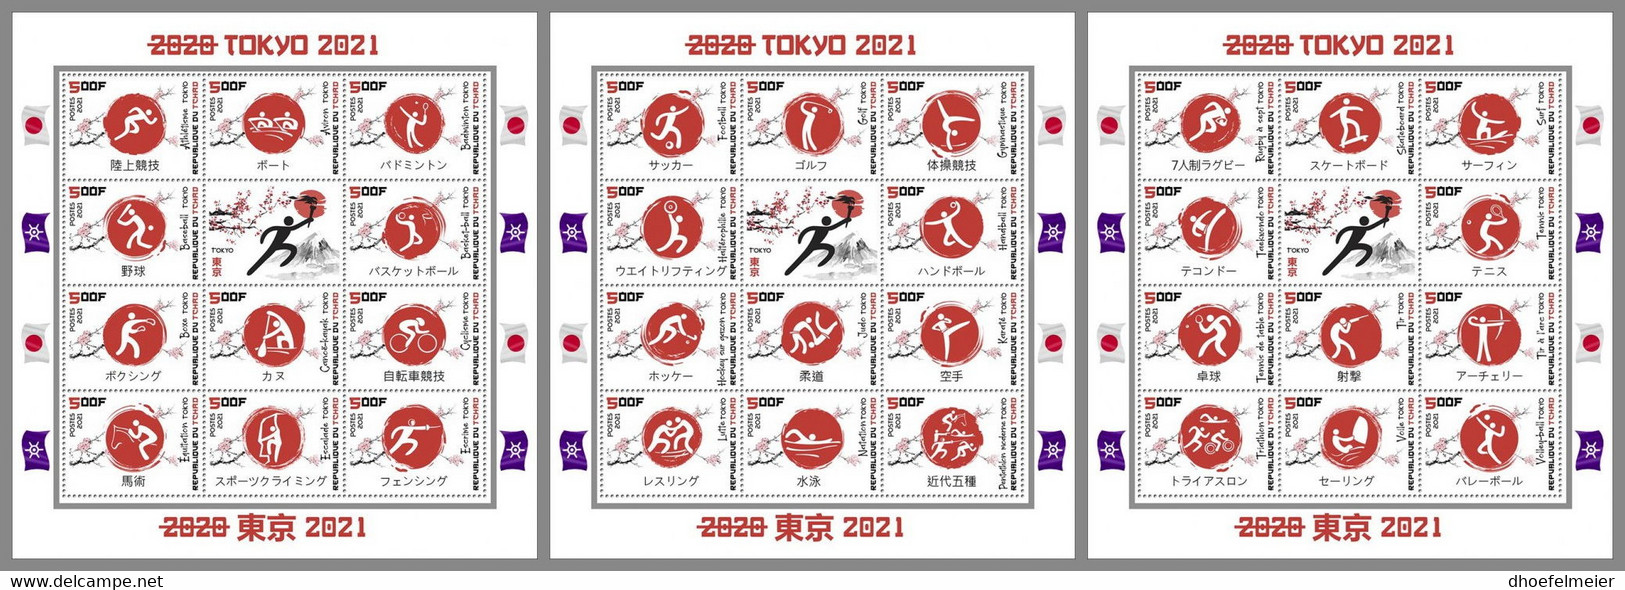 CHAD 2021 MNH Tokyo Summer Games 2021 Olympische Sommerspiele 3M/S - IMPERFORATED - DHQ2214 - Estate 2020 : Tokio